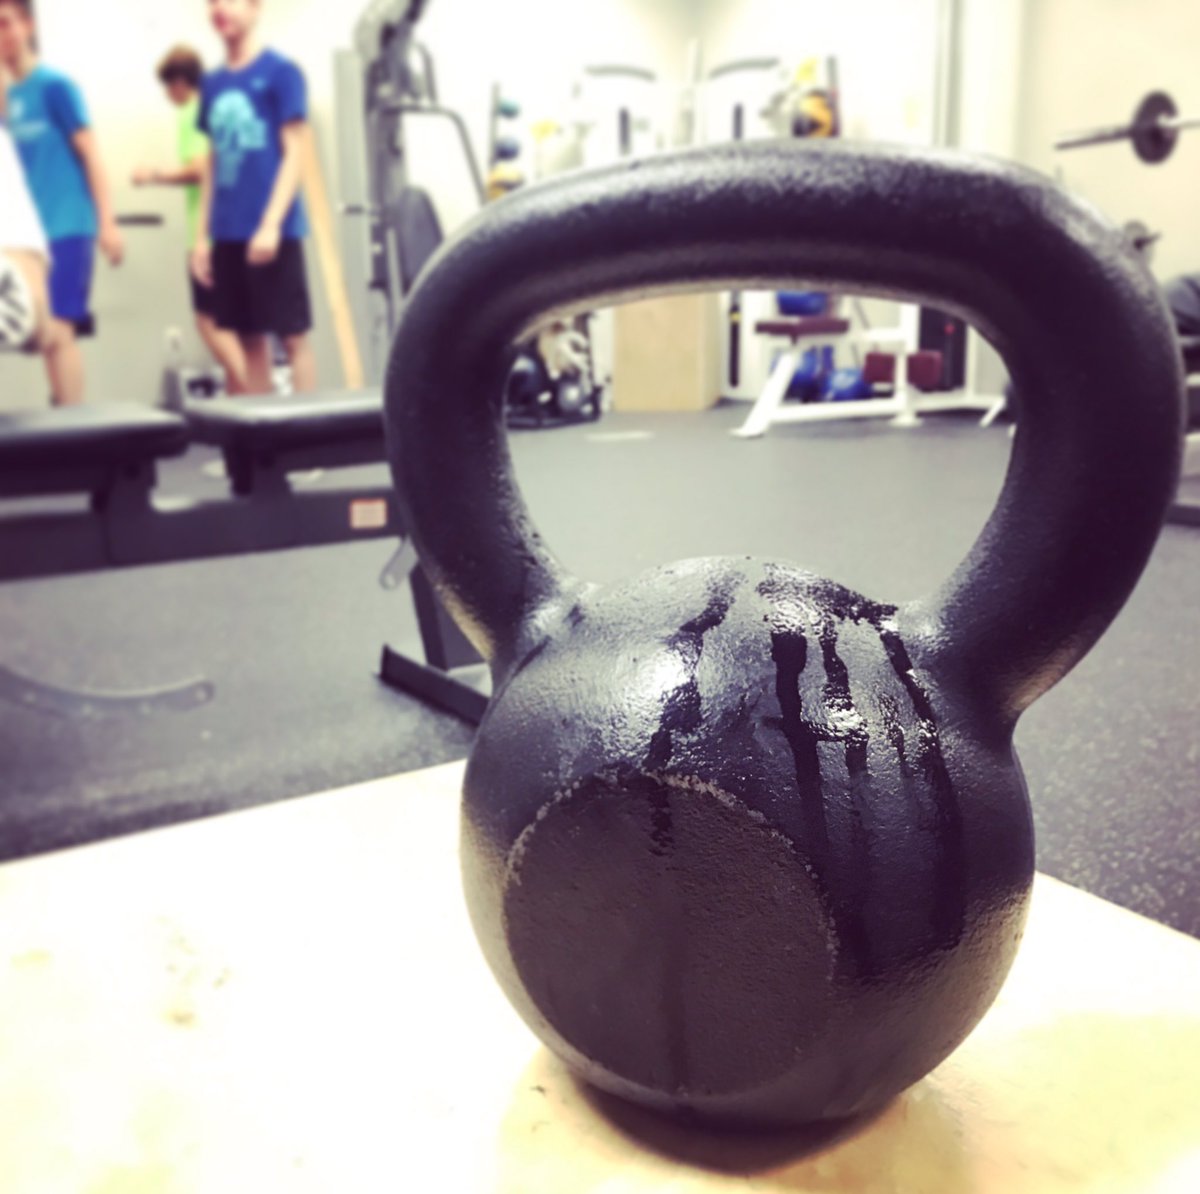 You know when the kettle bell starts to sweat, some serious WORK is going on! #StarStrength #SummerProgress